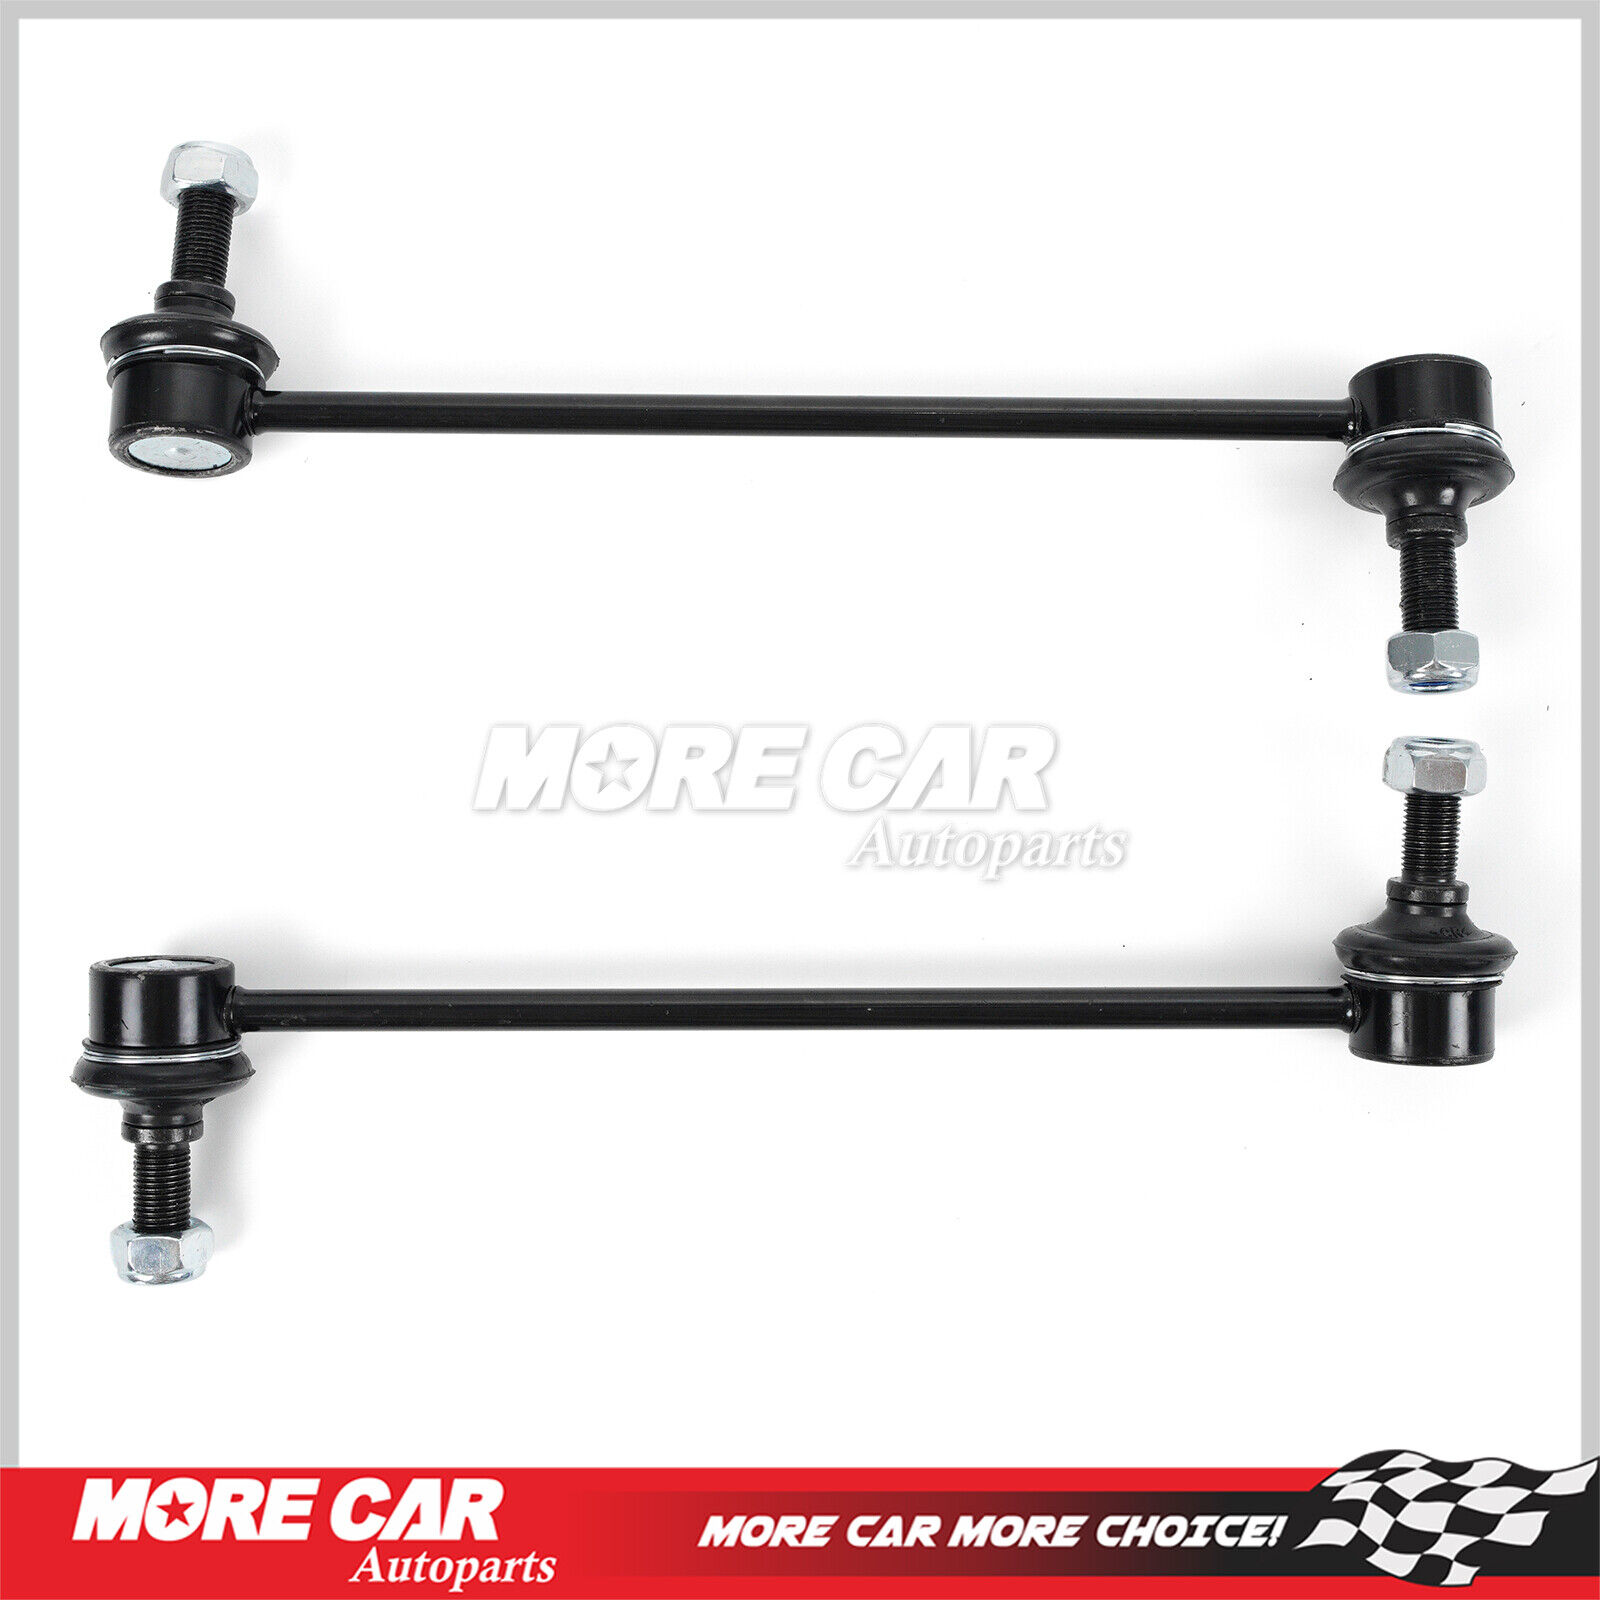 2Pcs Front Stabilizer Sway Bar End Links for 05-14 Ford Mustang 3.7 4.0 4.6 5.0L